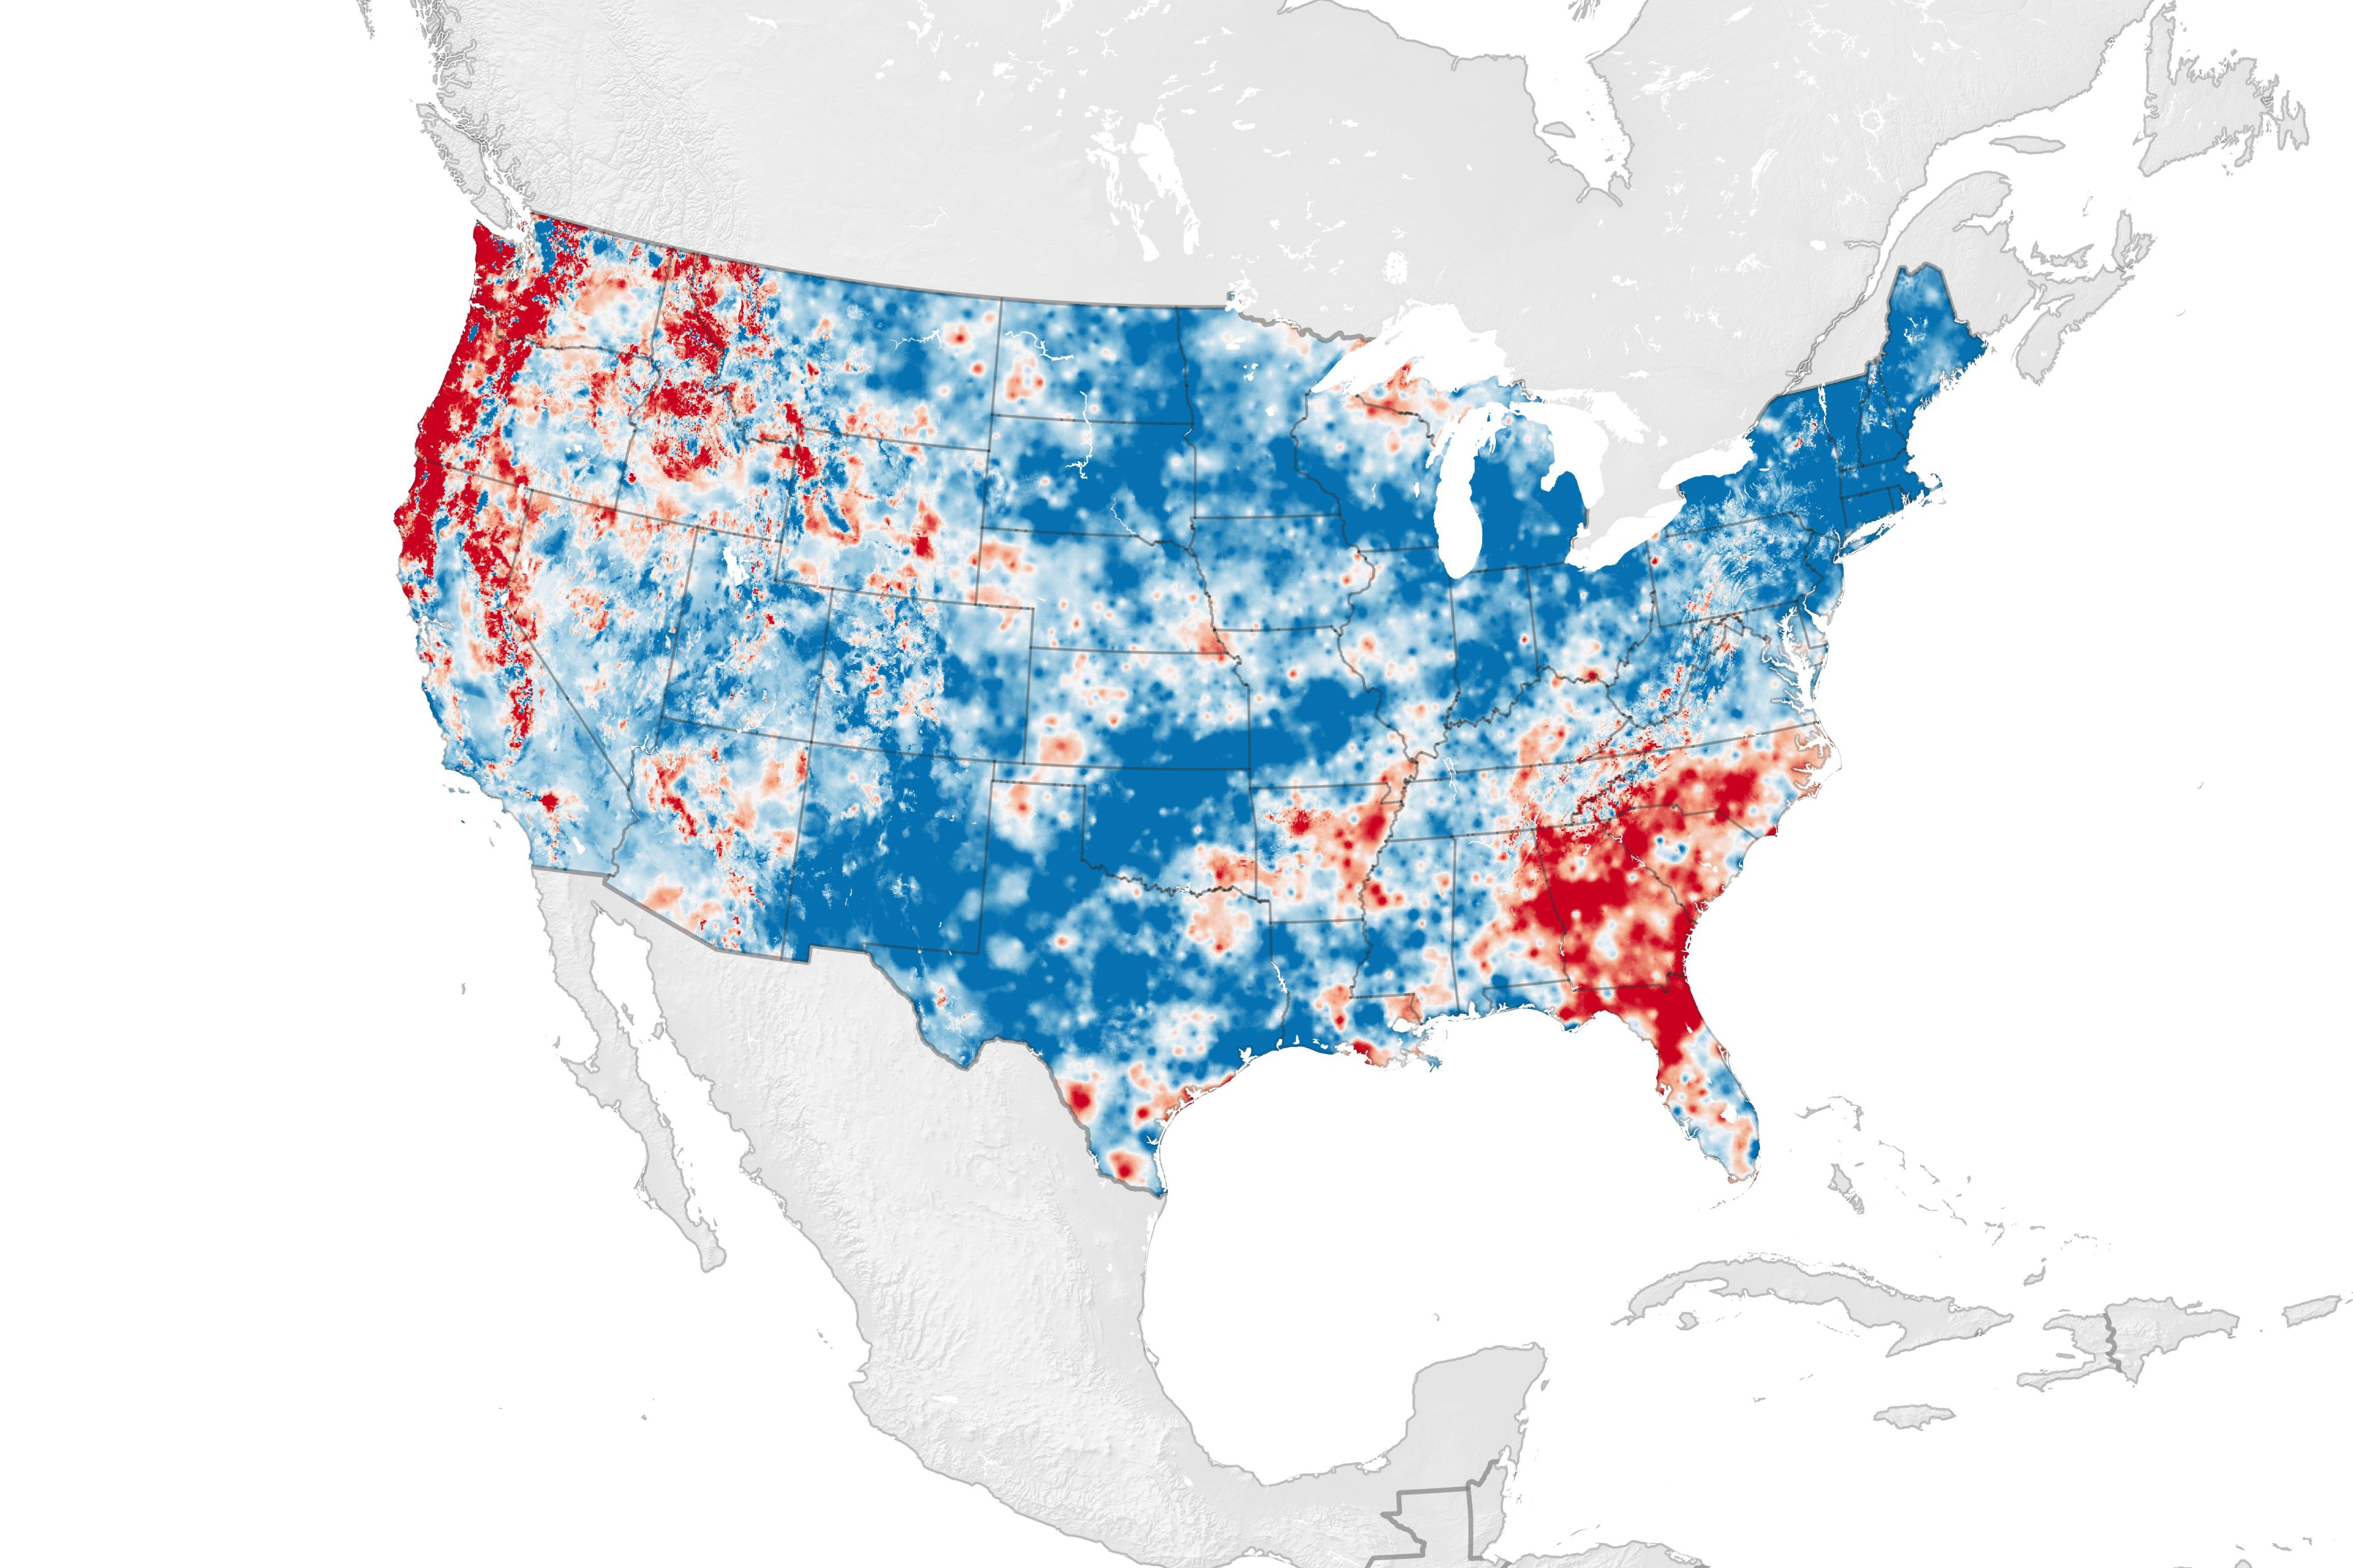 This map shows where the water cycle has been intensifying or weakening across the continental U.S. from 1945-1974 to 1985-2014.